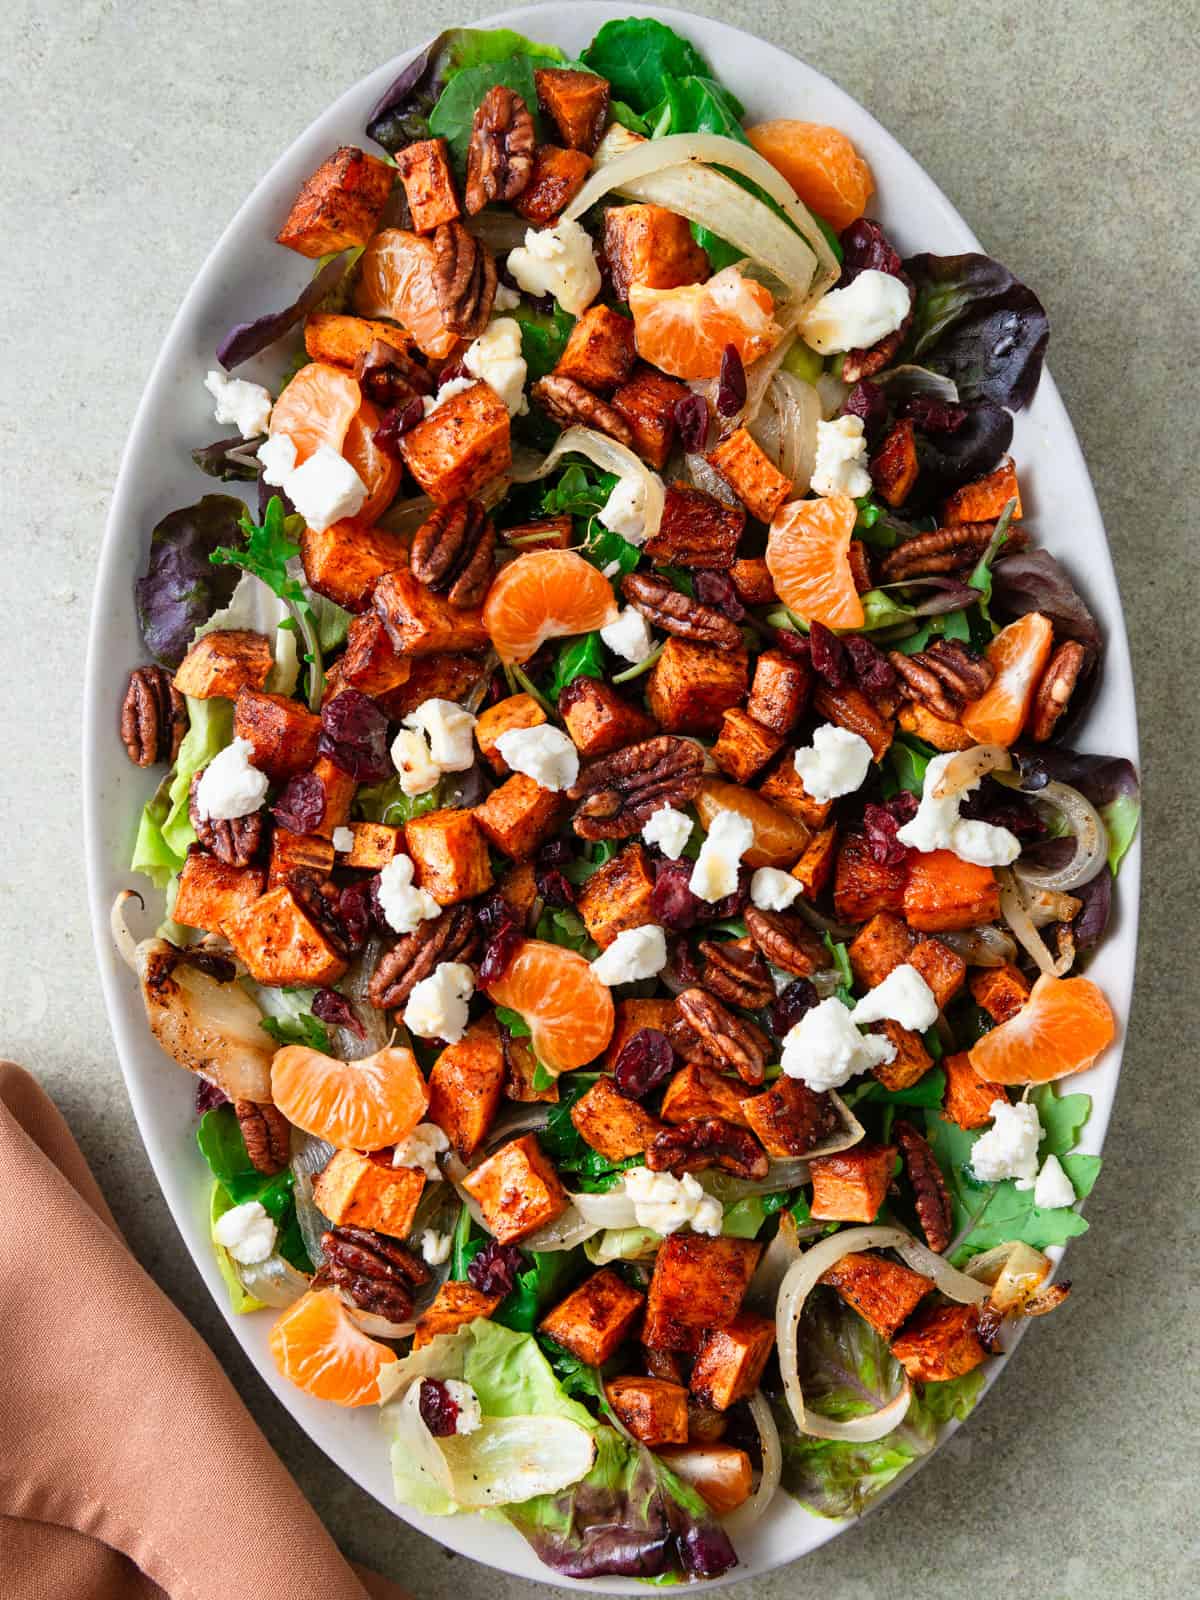 Roasted sweet potato salad is layered with citrus, roasted onions, creamy goat cheese and dried cranberries.